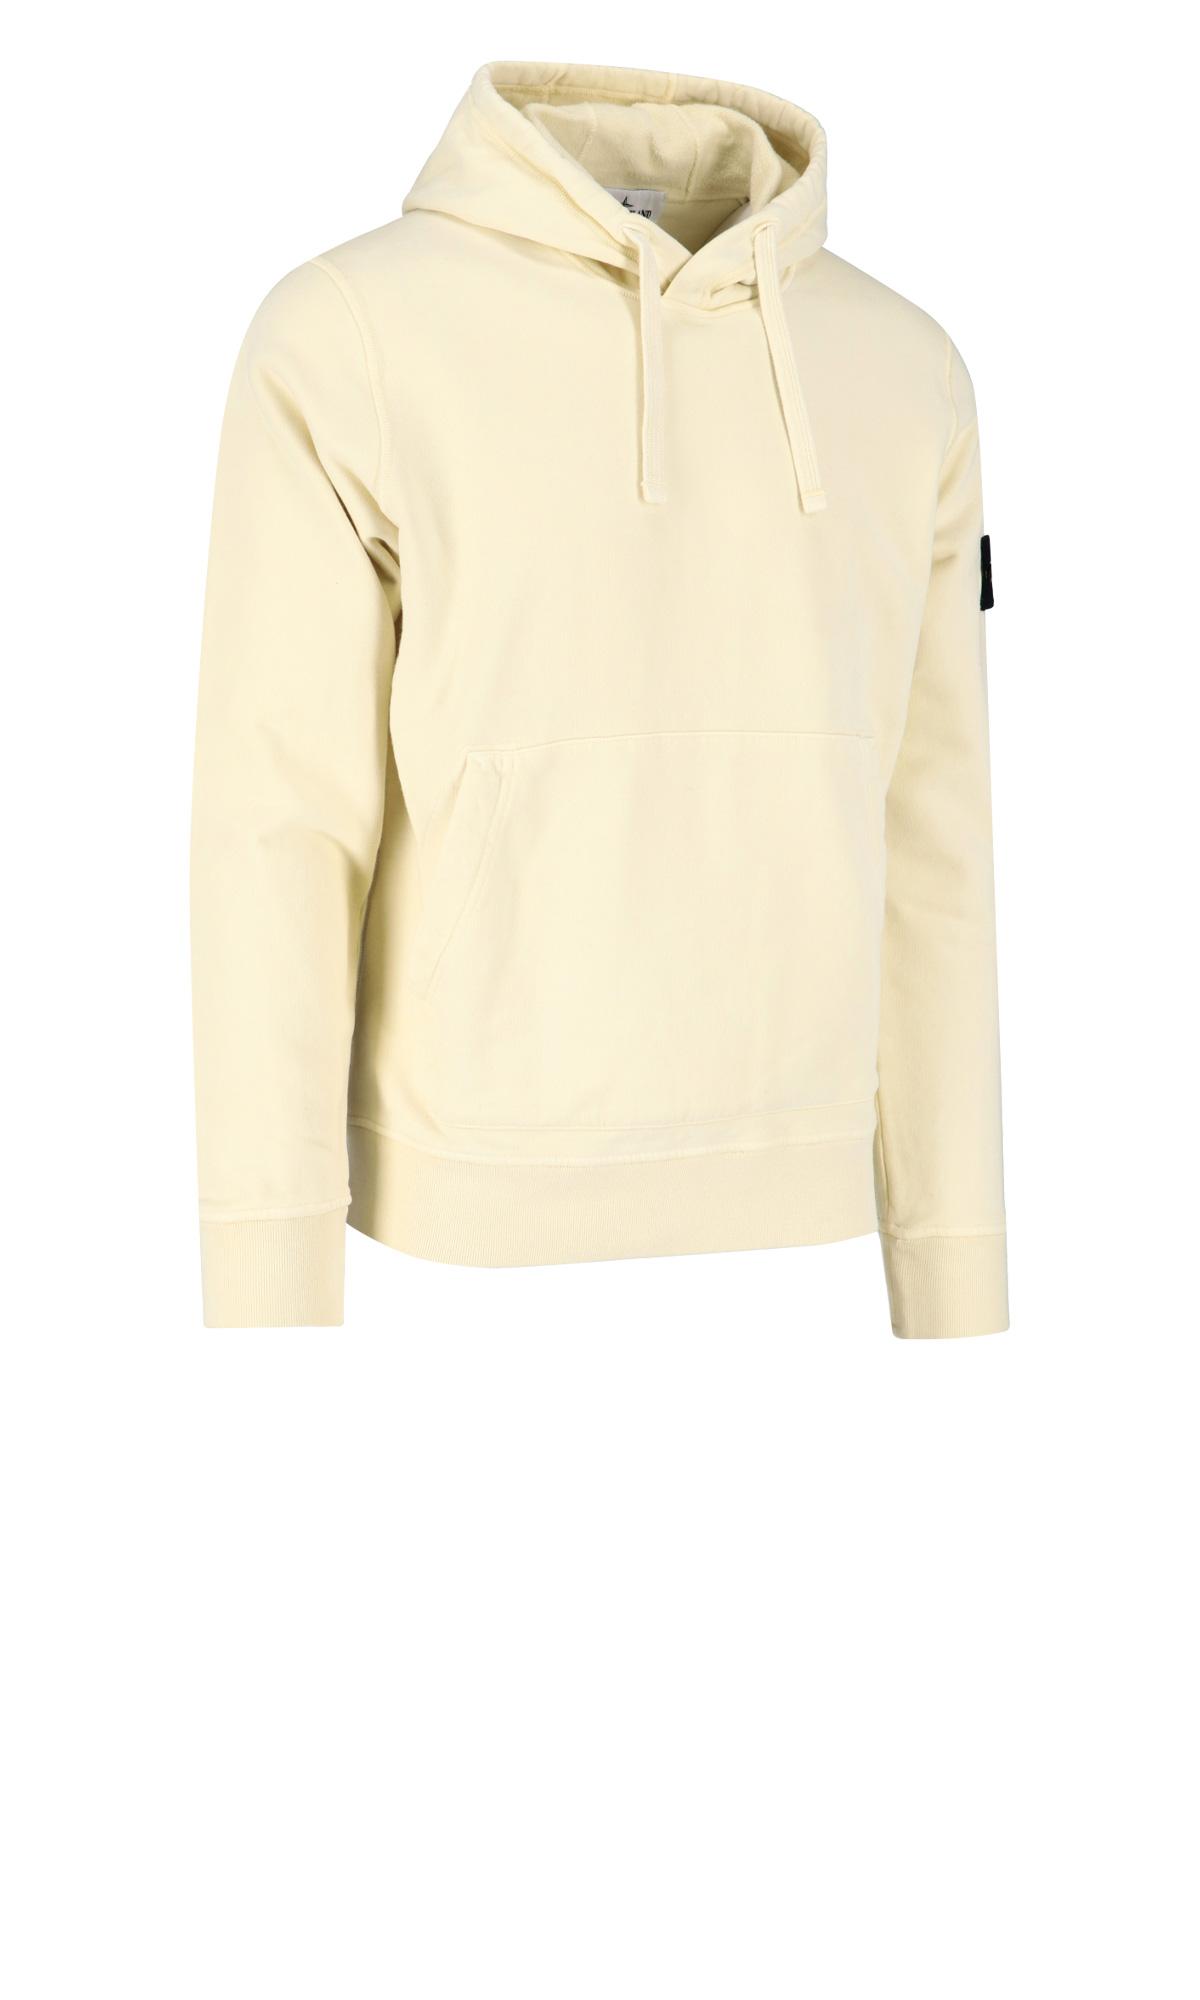 Stone Island Logo Hoodie in Natural for Men | Lyst